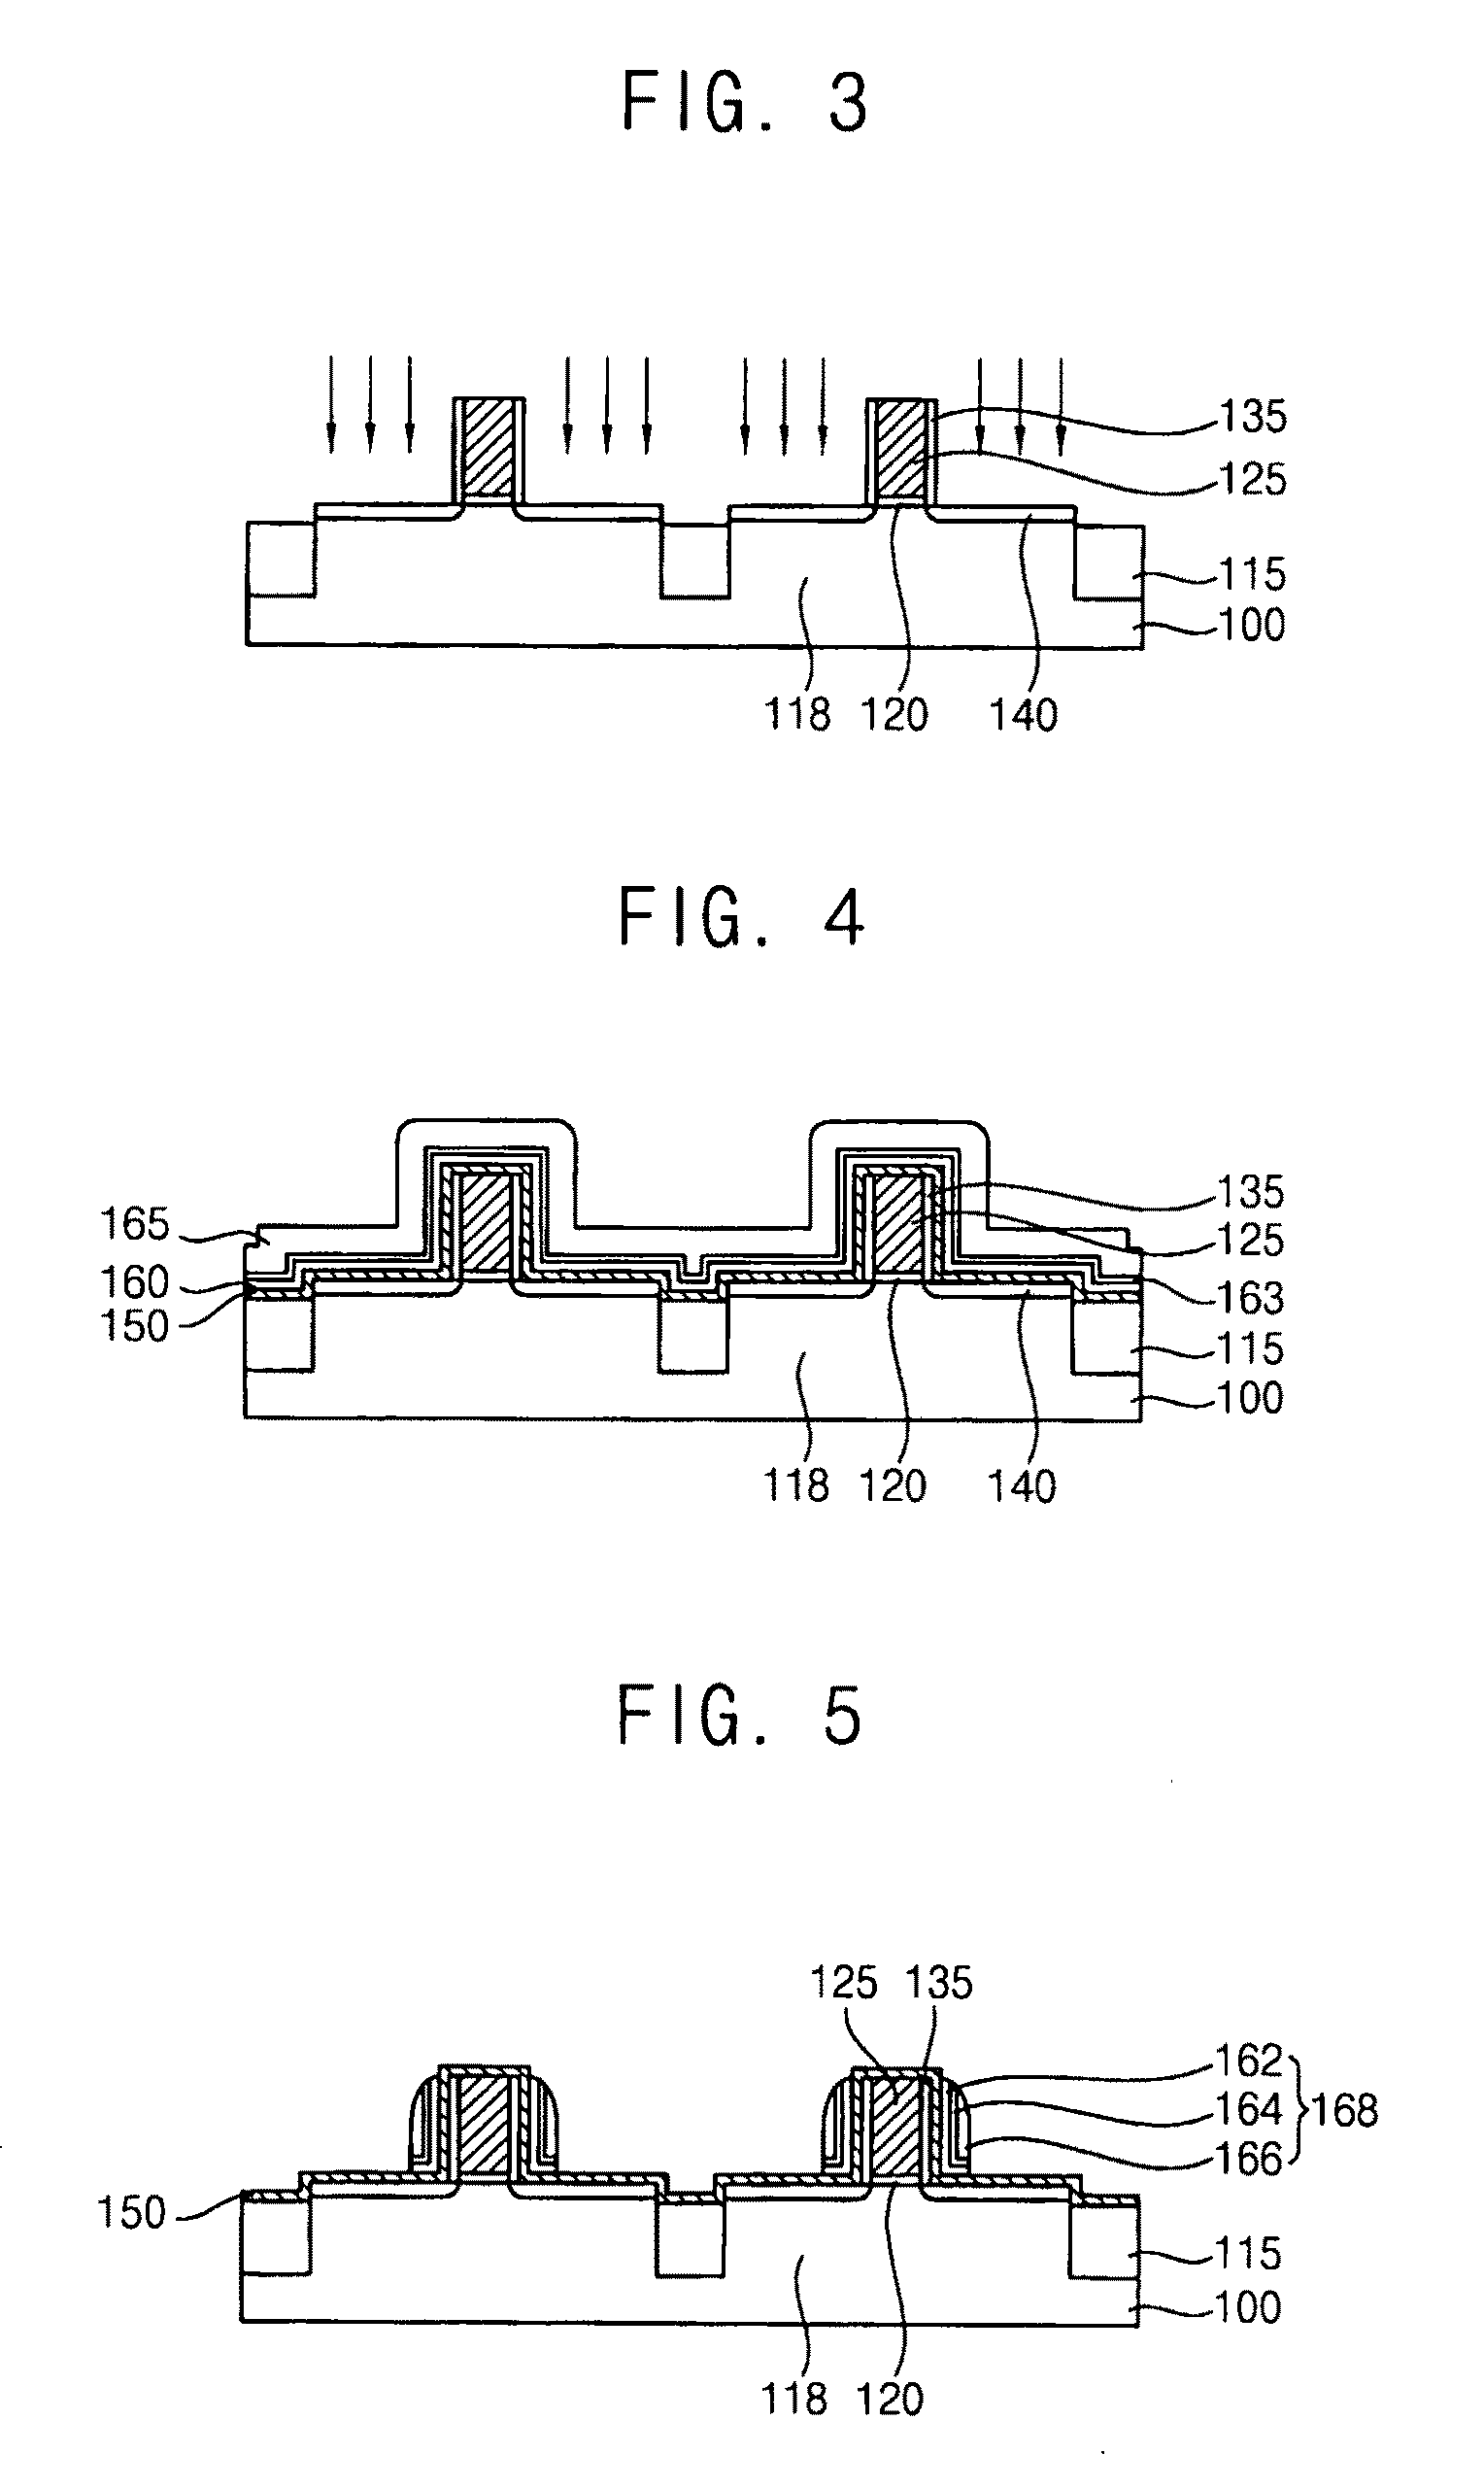 Methods of manufcturing a semiconductor device